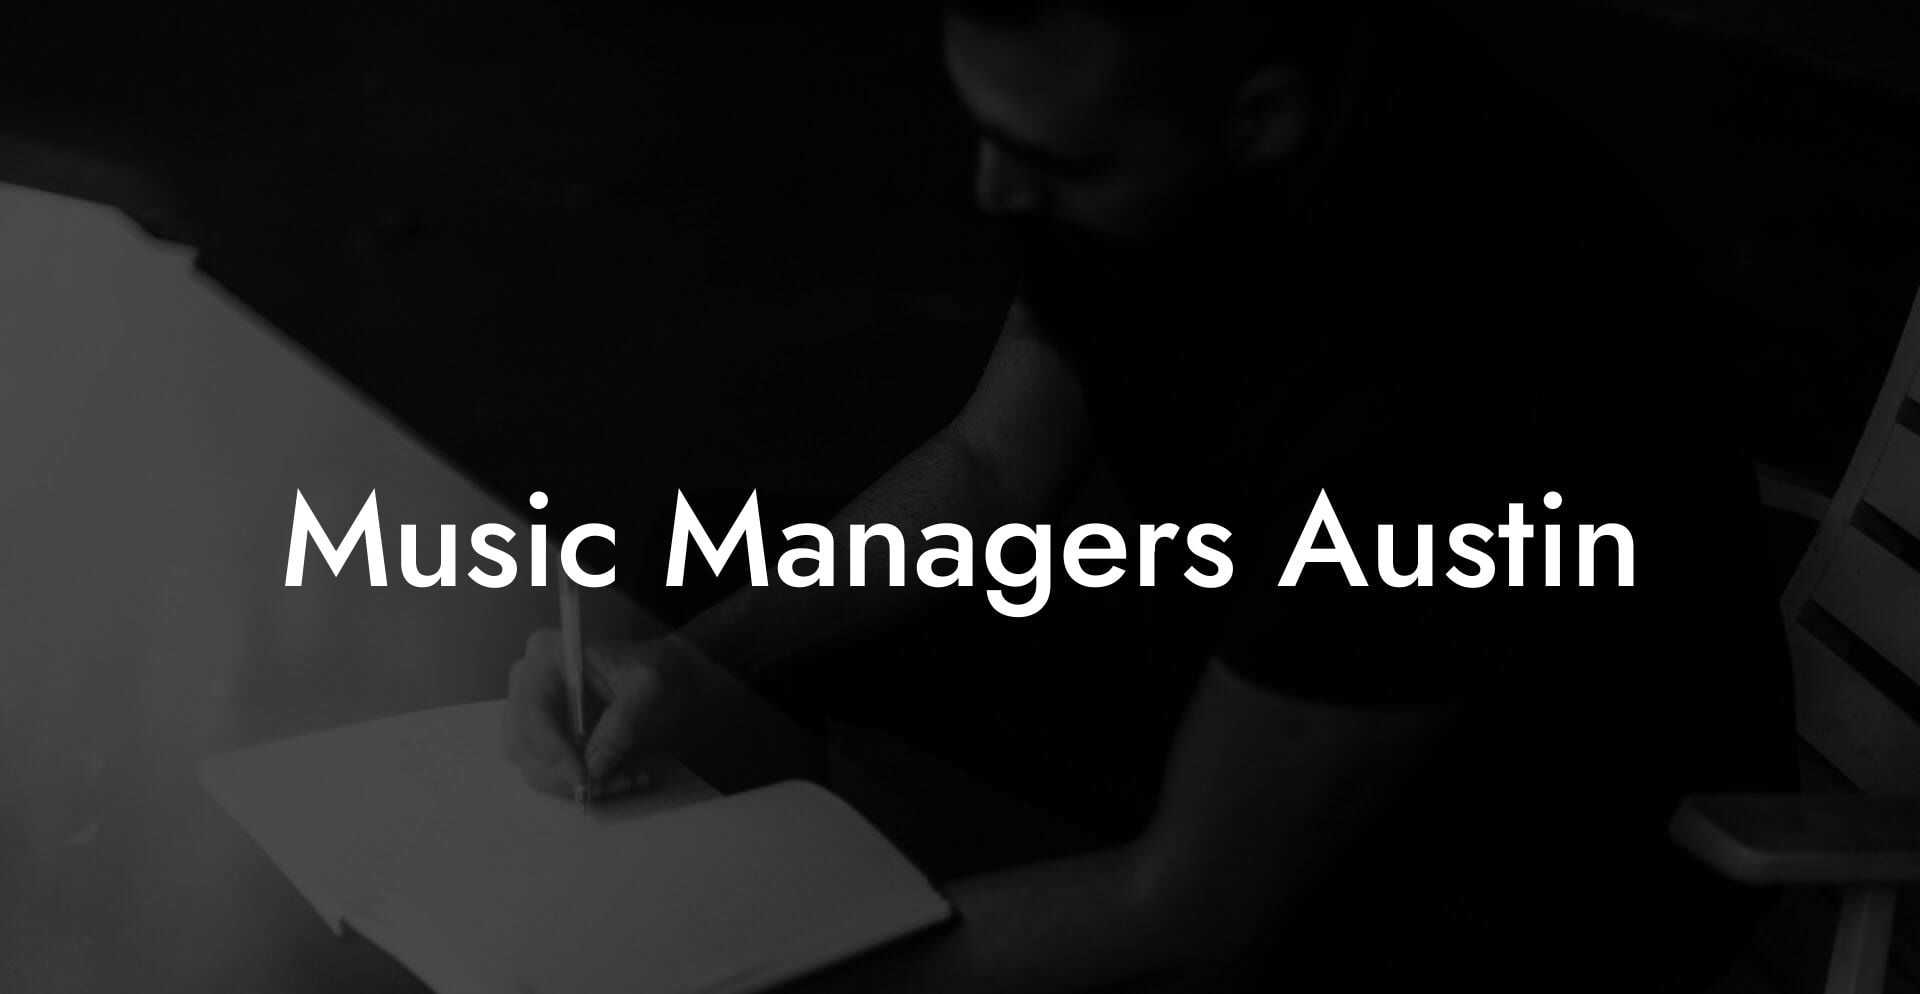 Music Managers Austin